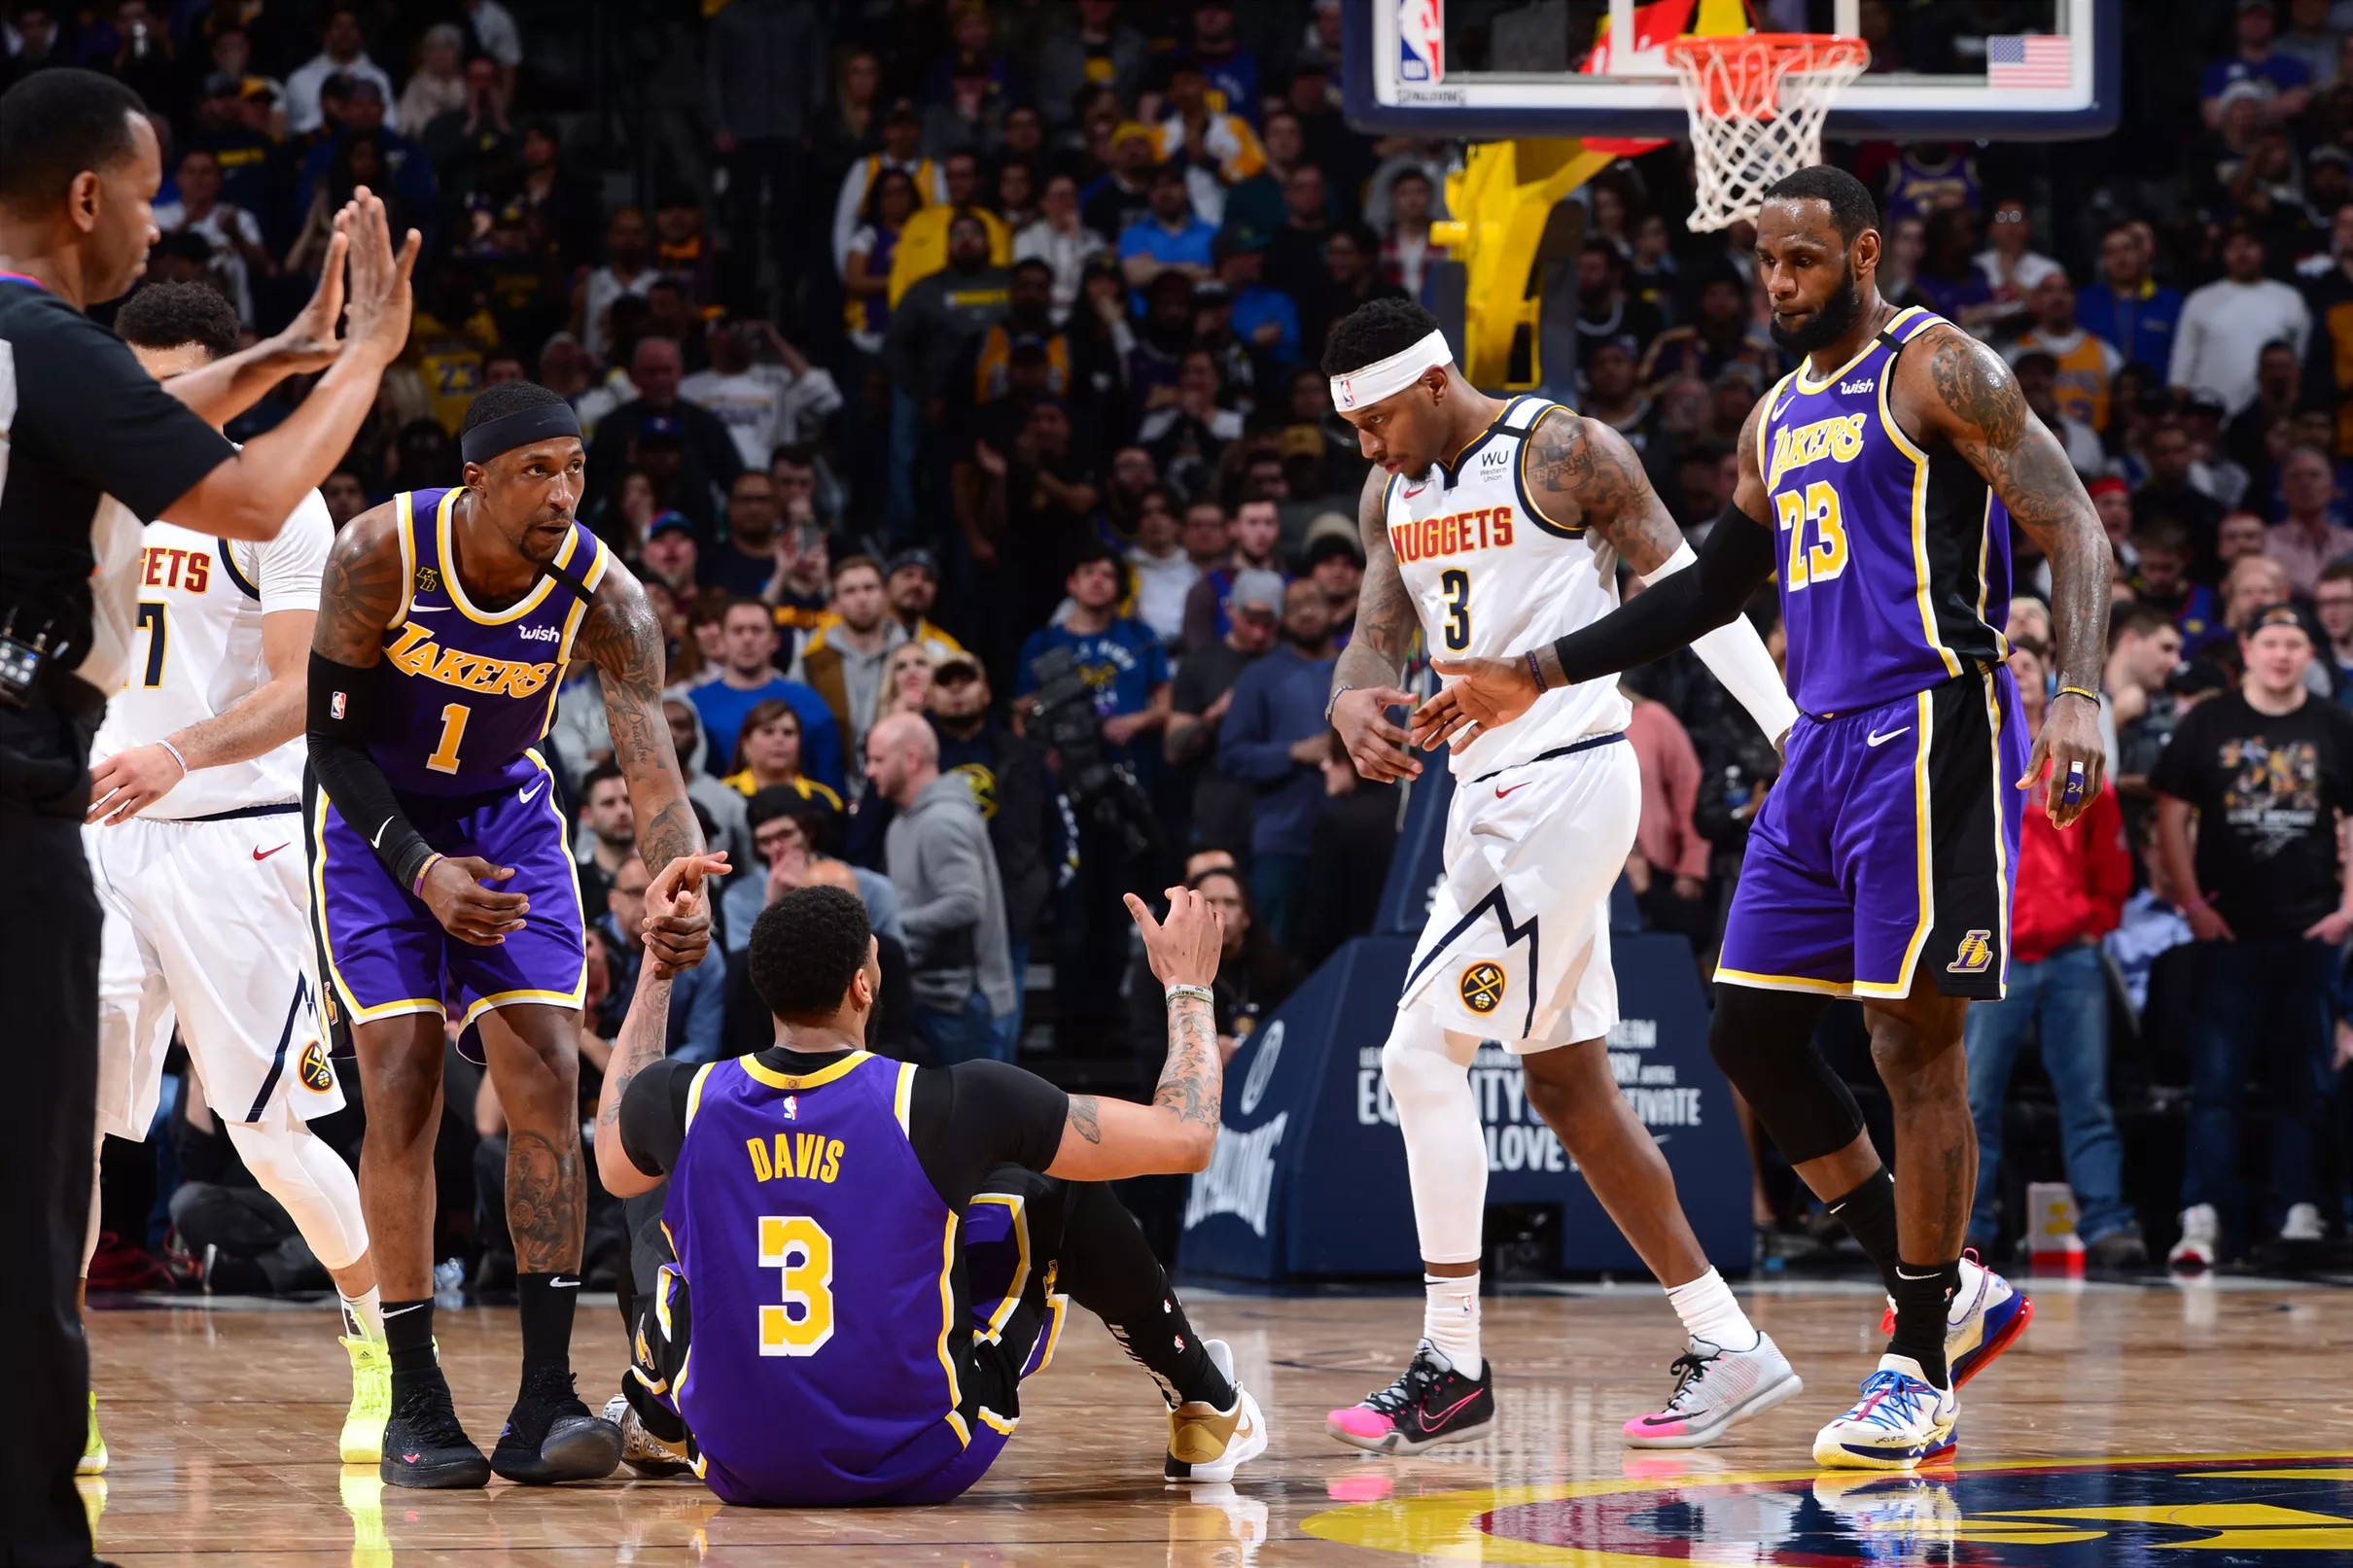 Lakers vs. Nuggets Final Score Exhausted Lakers shorthanded